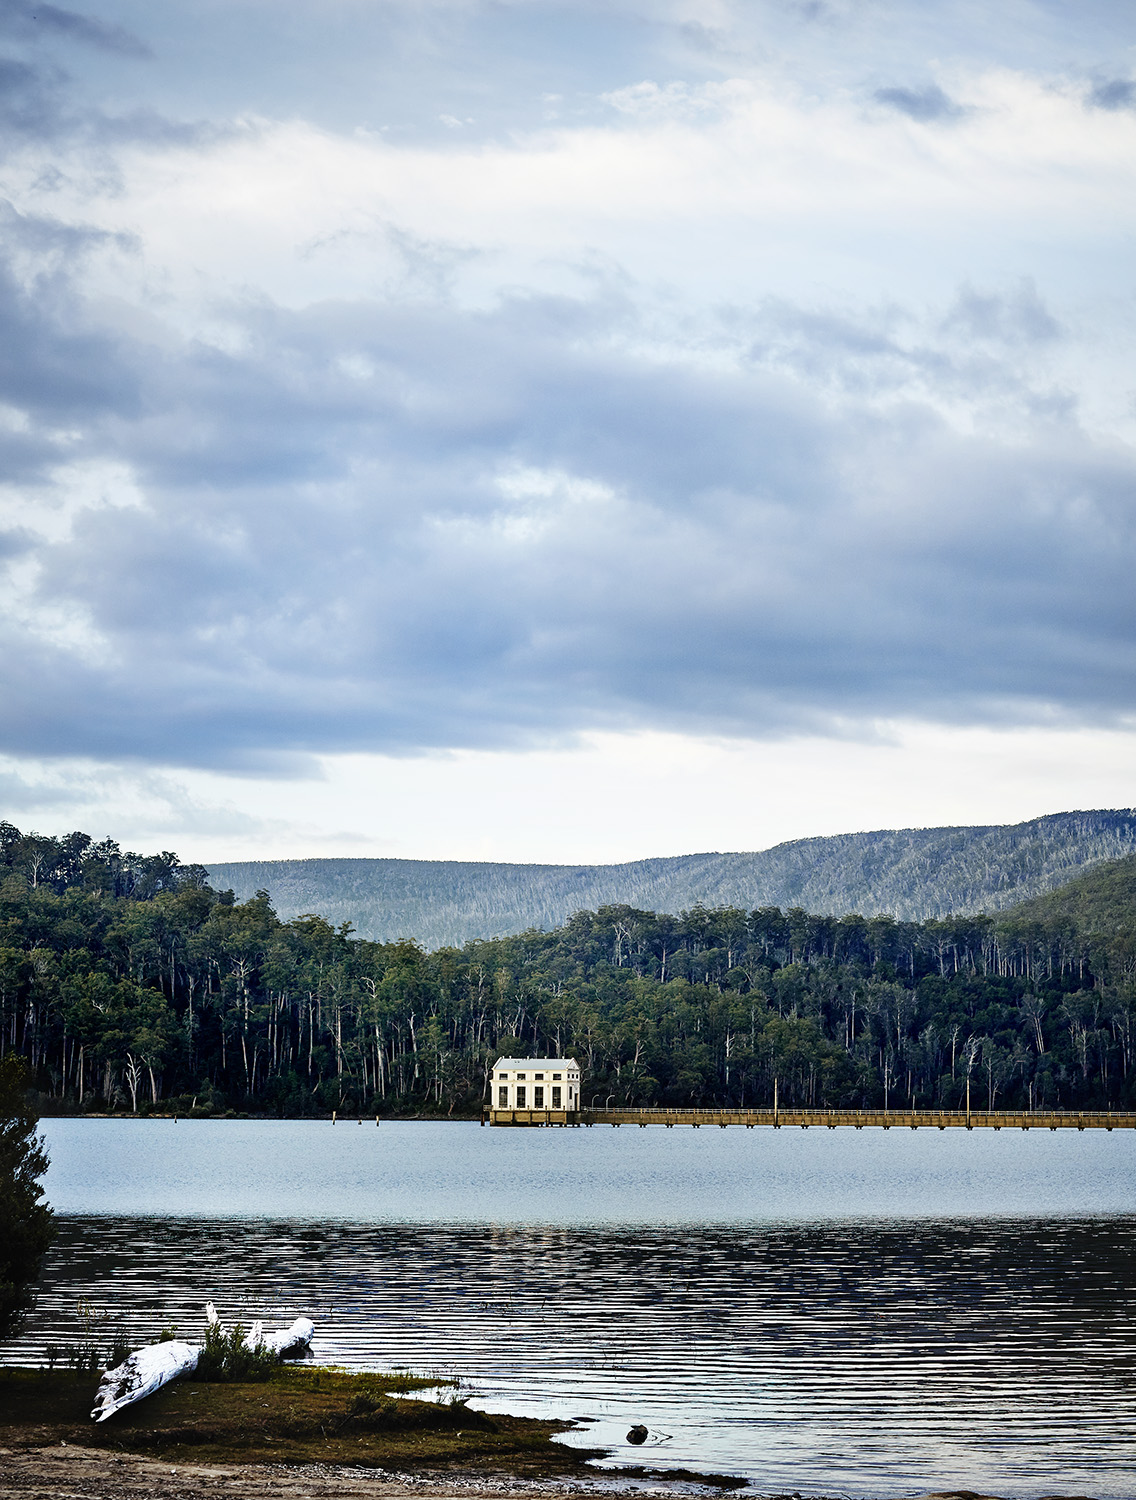 You Can Sleep In The Old Hydroelectric Plant In The Middle Of This Australian Lake